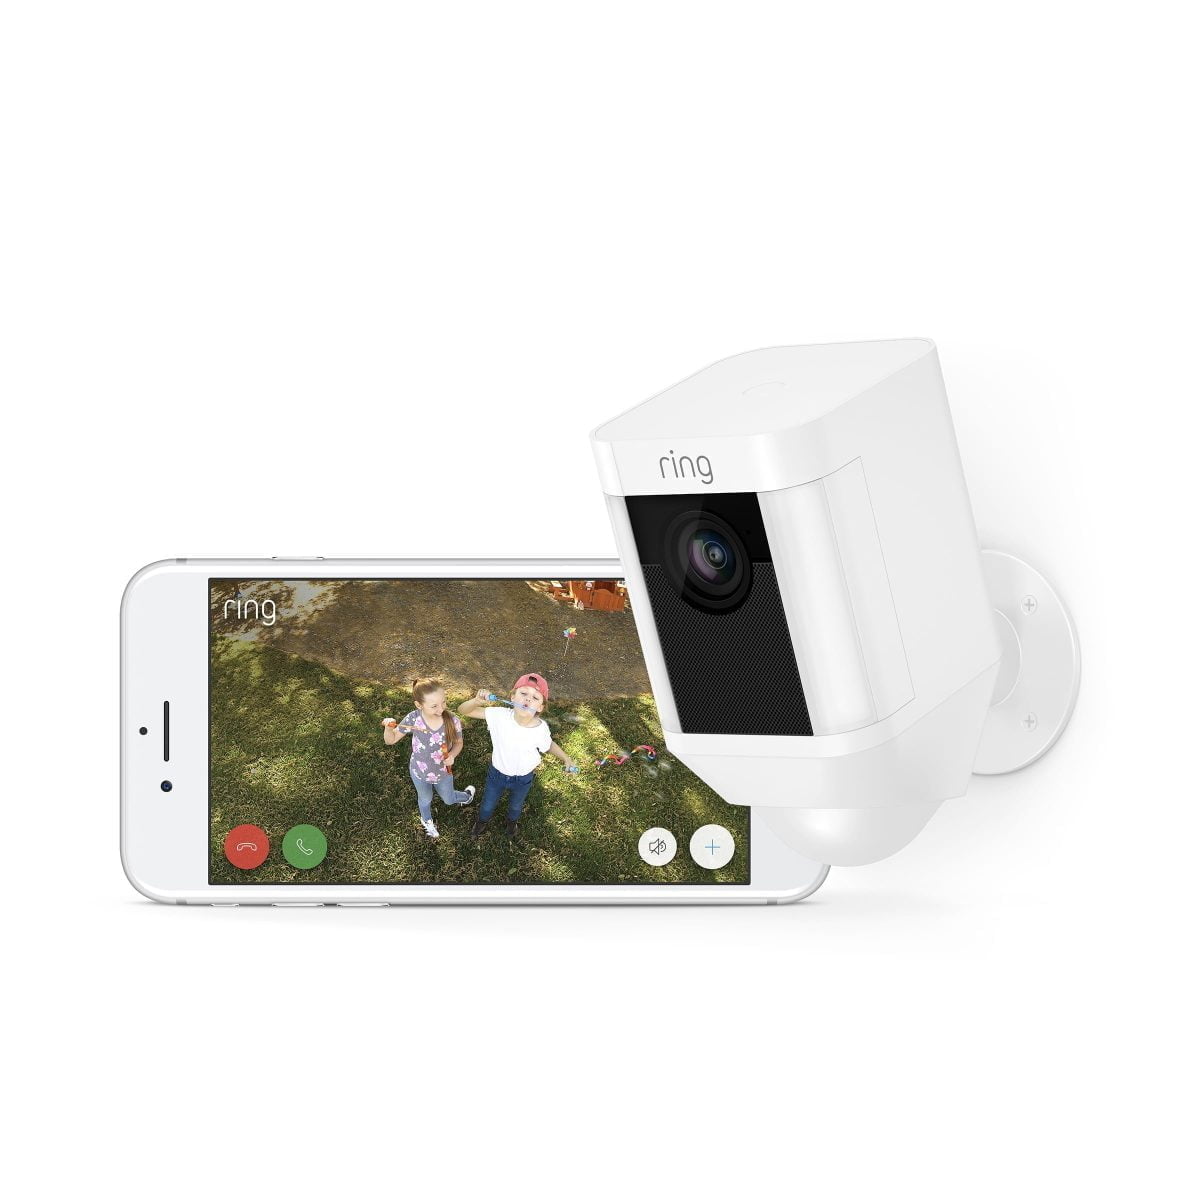 Ring Spotlight Cam Battery White Product Lifestyle &Lt;H1&Gt;Ring Spotlight Cam Battery - White&Lt;/H1&Gt; Https://Www.youtube.com/Watch?V=Yrbc1Pwuasg &Lt;Ul&Gt; &Lt;Li&Gt;See, Hear And Speak To People On Your Property From Your Phone, Tablet And Pc&Lt;/Li&Gt; &Lt;Li&Gt;Shine The Lights And Start Recording Video As Soon As Motion Is Detected&Lt;/Li&Gt; &Lt;Li&Gt;Sound The 110-Decibel Siren On Suspicious Activity. Connectivity-802.11 B G N Wi-Fi Connection At 2.4Ghz&Lt;/Li&Gt; &Lt;Li&Gt;Includes All The Tools You Need To Get Your Cam Setup In Just A Few Minutes&Lt;/Li&Gt; &Lt;Li&Gt;Battery-Powered Hd Camera With Two-Way Talk And Spotlights, For Security Anywhere You Need It&Lt;/Li&Gt; &Lt;/Ul&Gt; &Lt;Pre&Gt;&Lt;Strong&Gt;&Lt;Span Class=&Quot;A-List-Item&Quot;&Gt;One Year Warranty &Lt;B&Gt;We Also Provide International Wholesale And Retail Shipping To All Gcc Countries: Saudi Arabia, Qatar, Oman, Kuwait, Bahrain.&Lt;/B&Gt;&Lt;/Span&Gt;&Lt;/Strong&Gt;&Lt;/Pre&Gt; Ring Spotlight Cam Battery Ring Spotlight Cam Battery - White